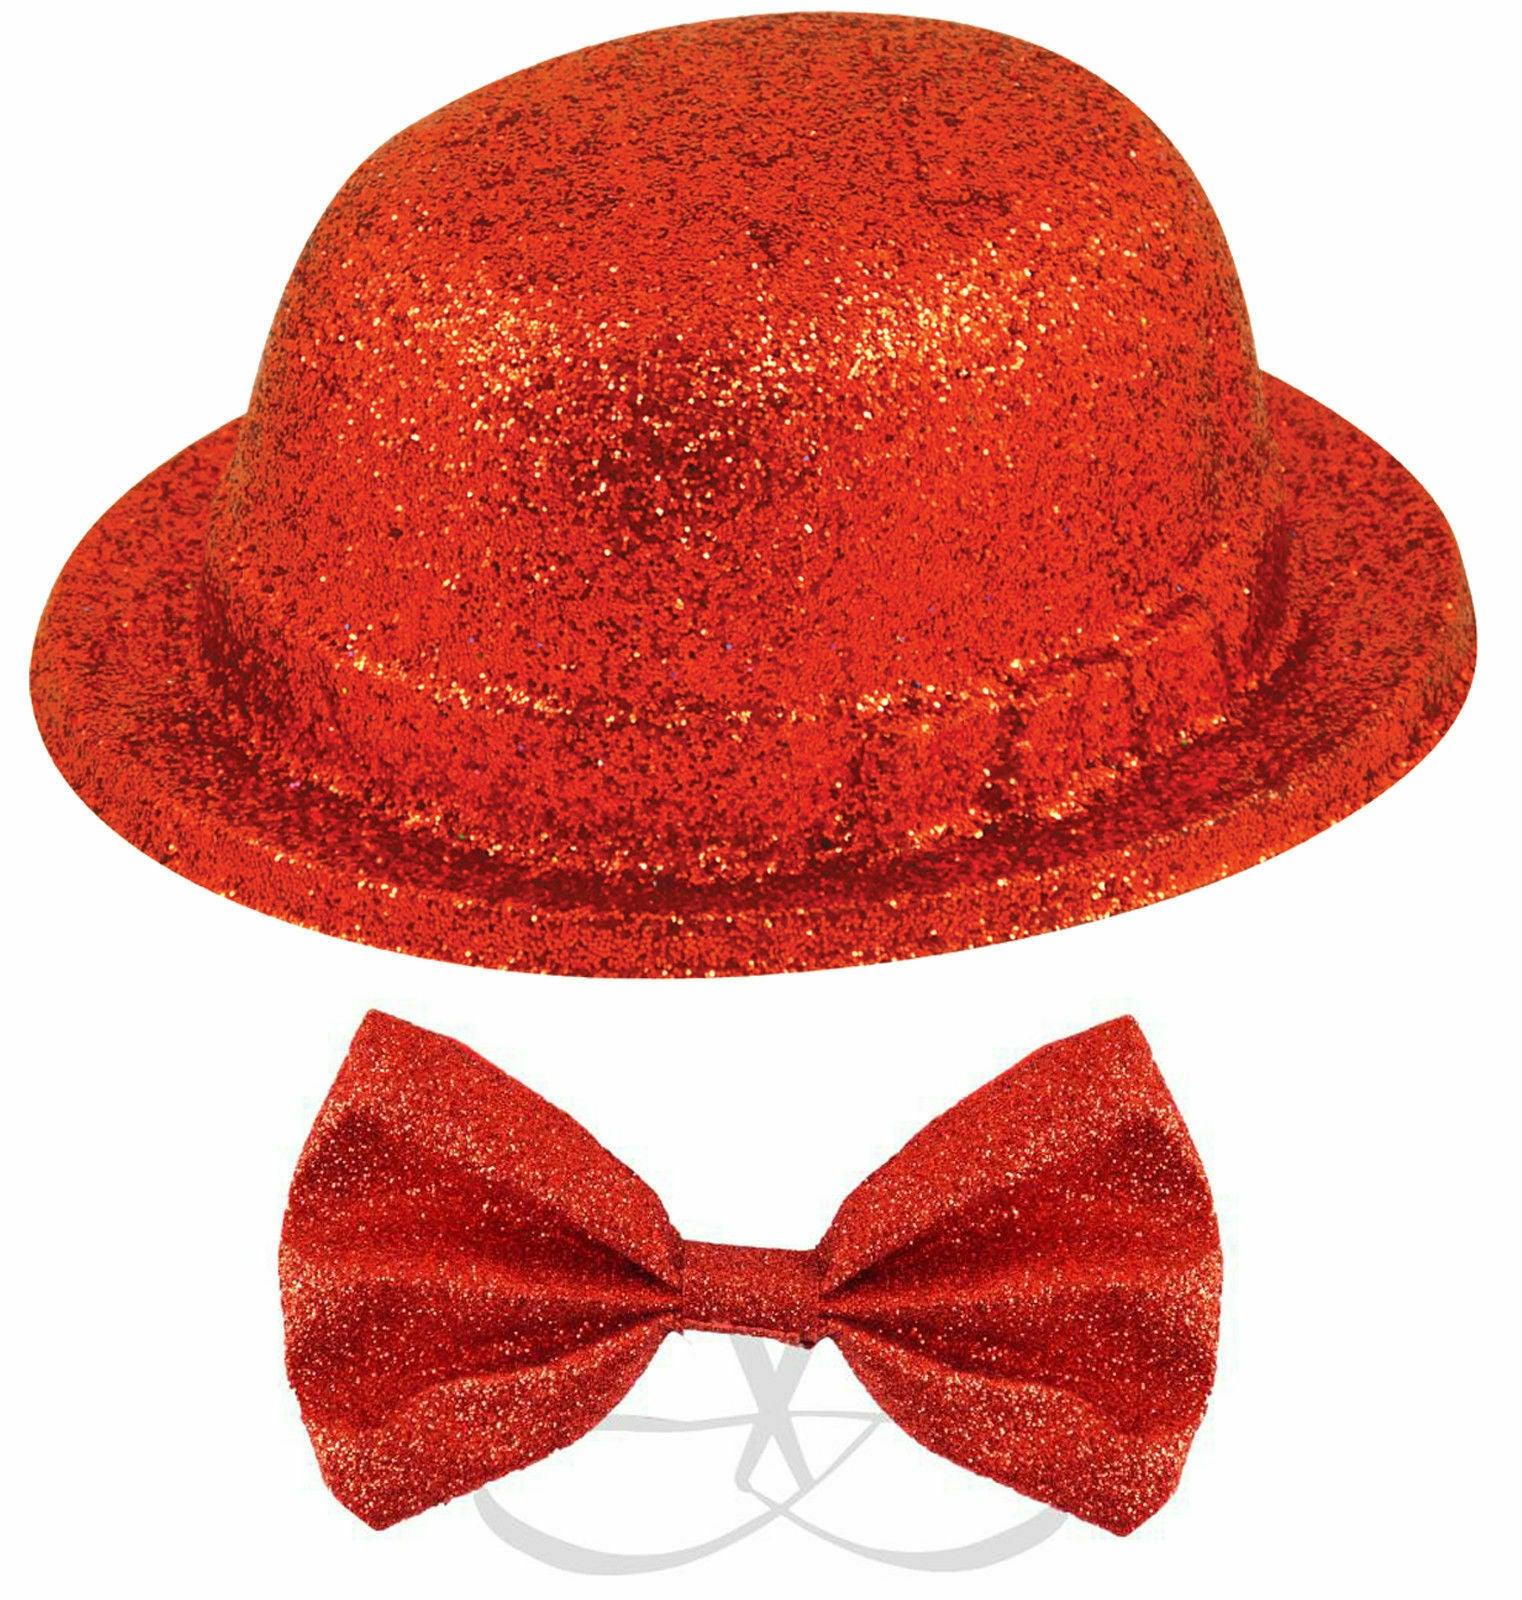 Red Plastic Glitter Bowler Hat & Elasticated Sparkly Bow Tie Fancy Dress 2 Pcs S - Labreeze